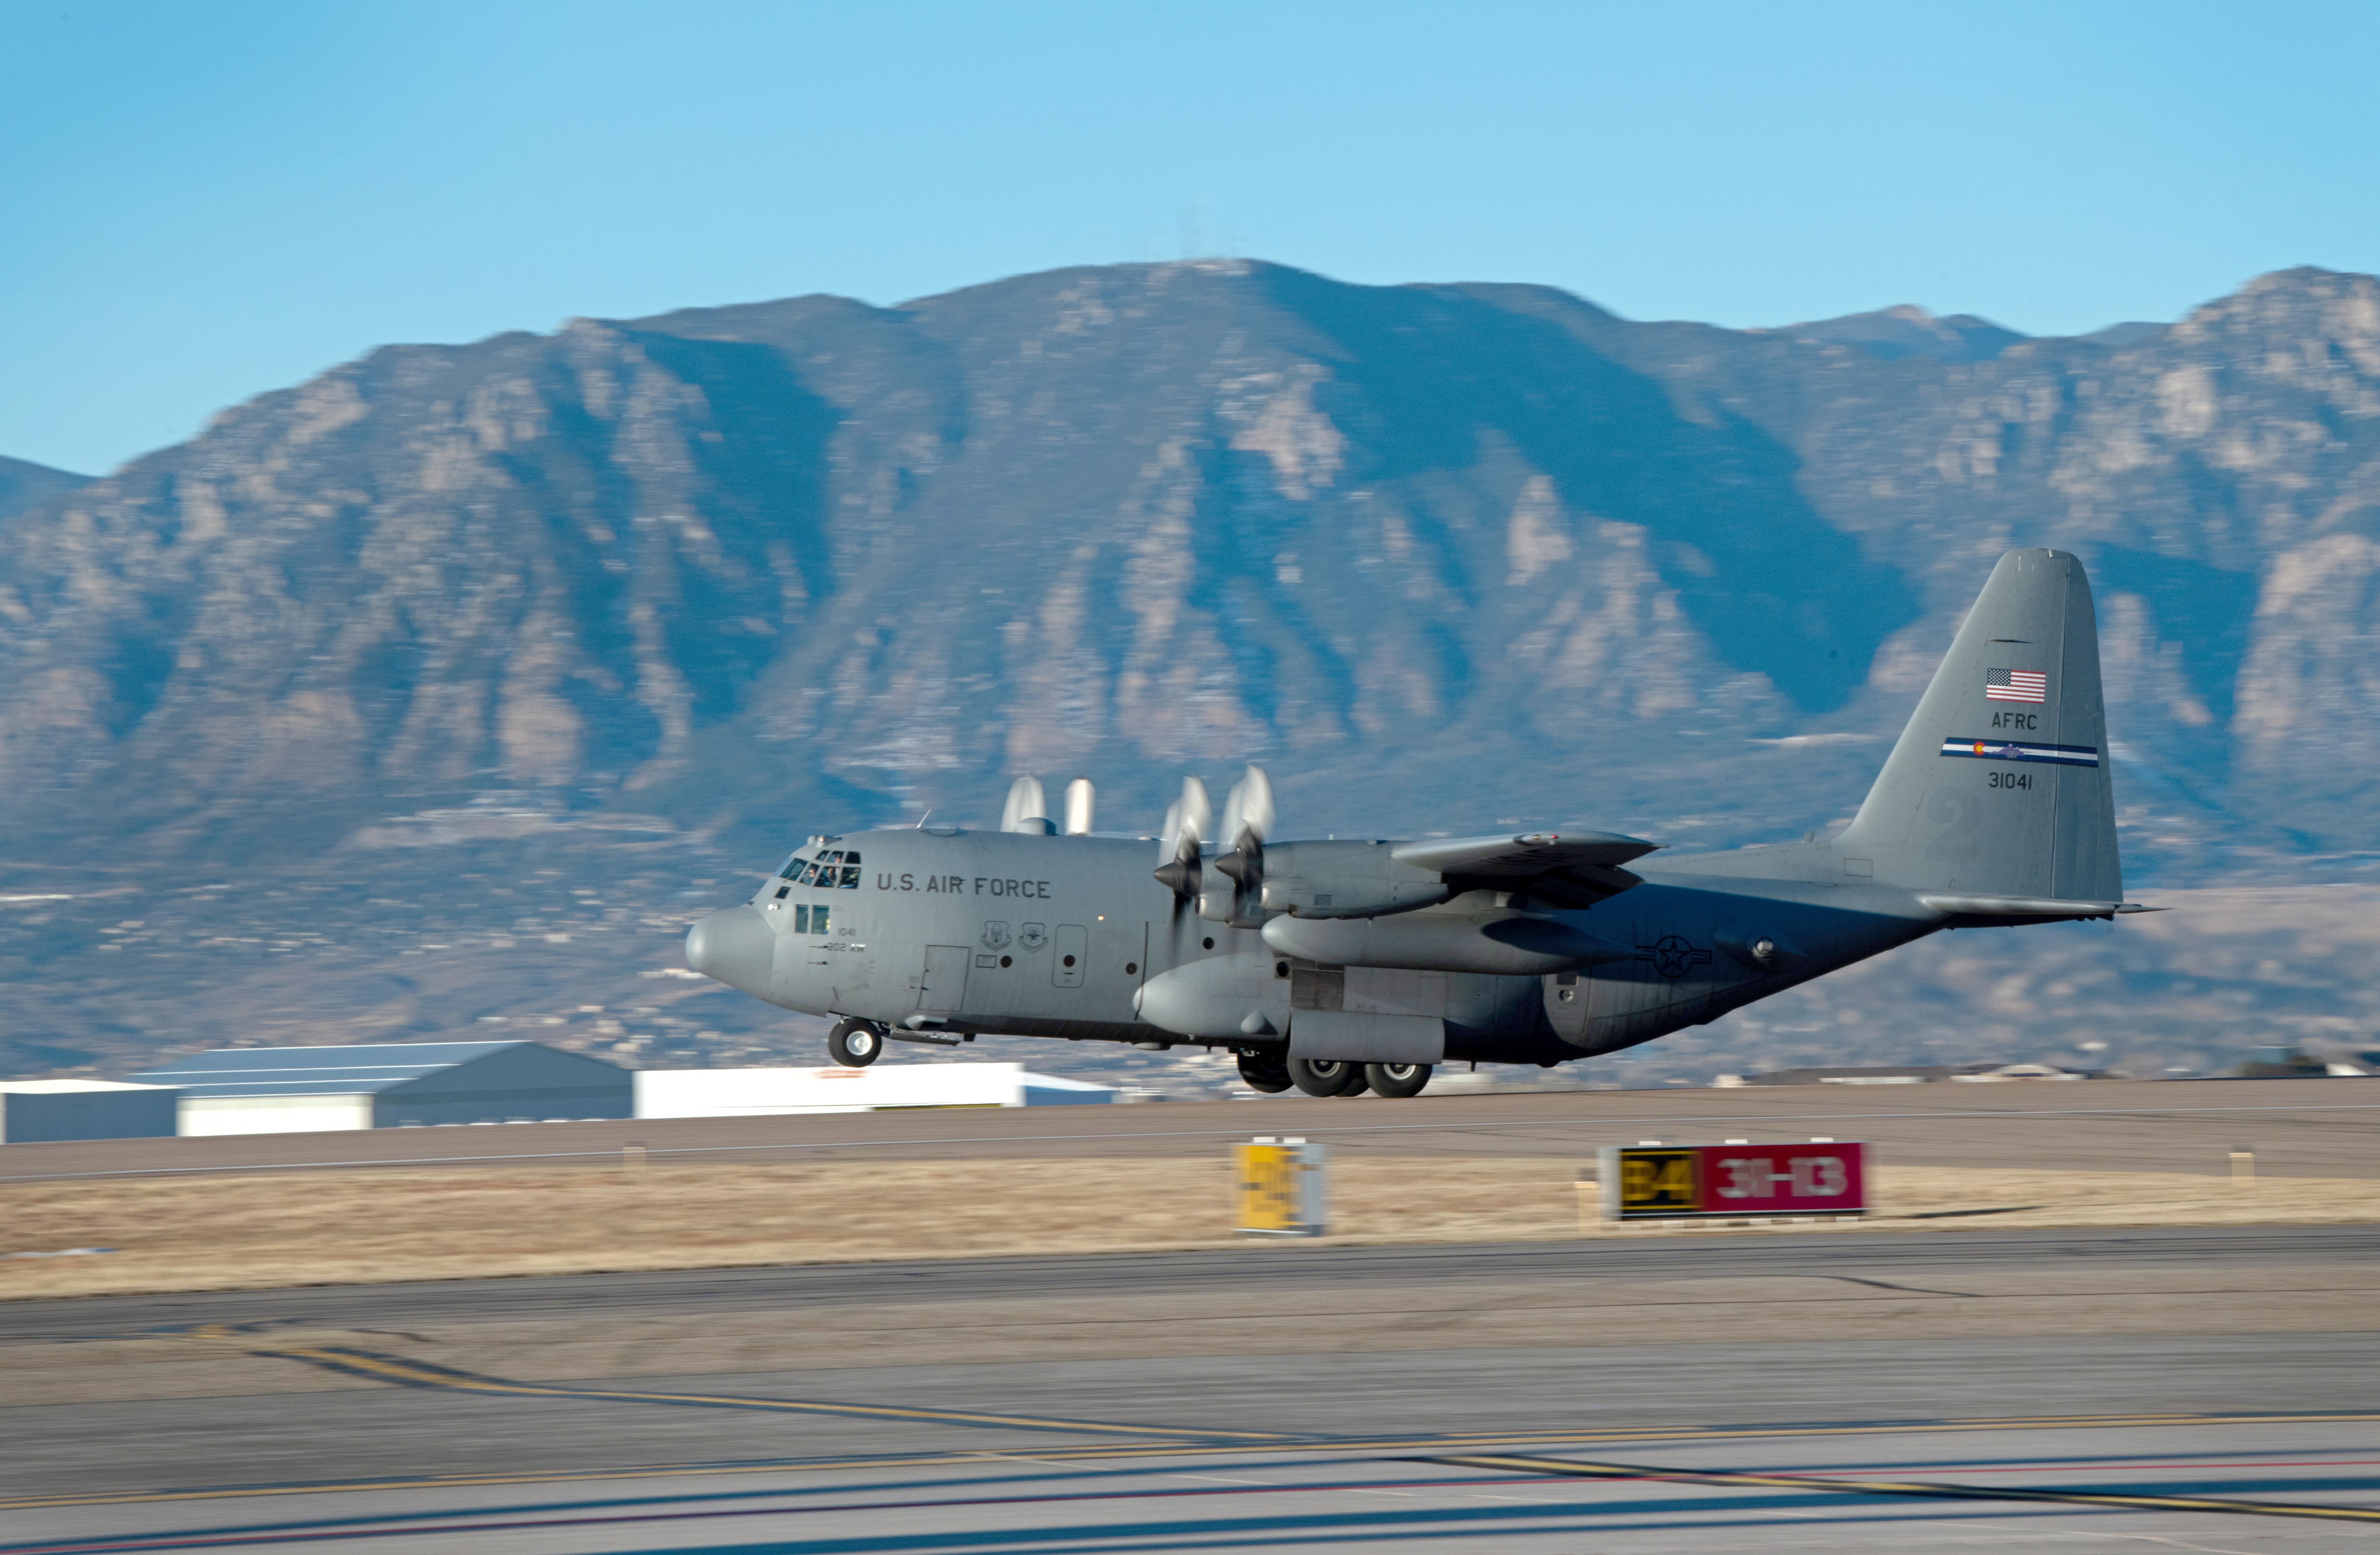 A C-130 carrying members of the 302nd Airlift Wing lifts off the runway in departure to an undisclosured location Feb. 5, 2021, Peterson Air Force Base, Colorado.